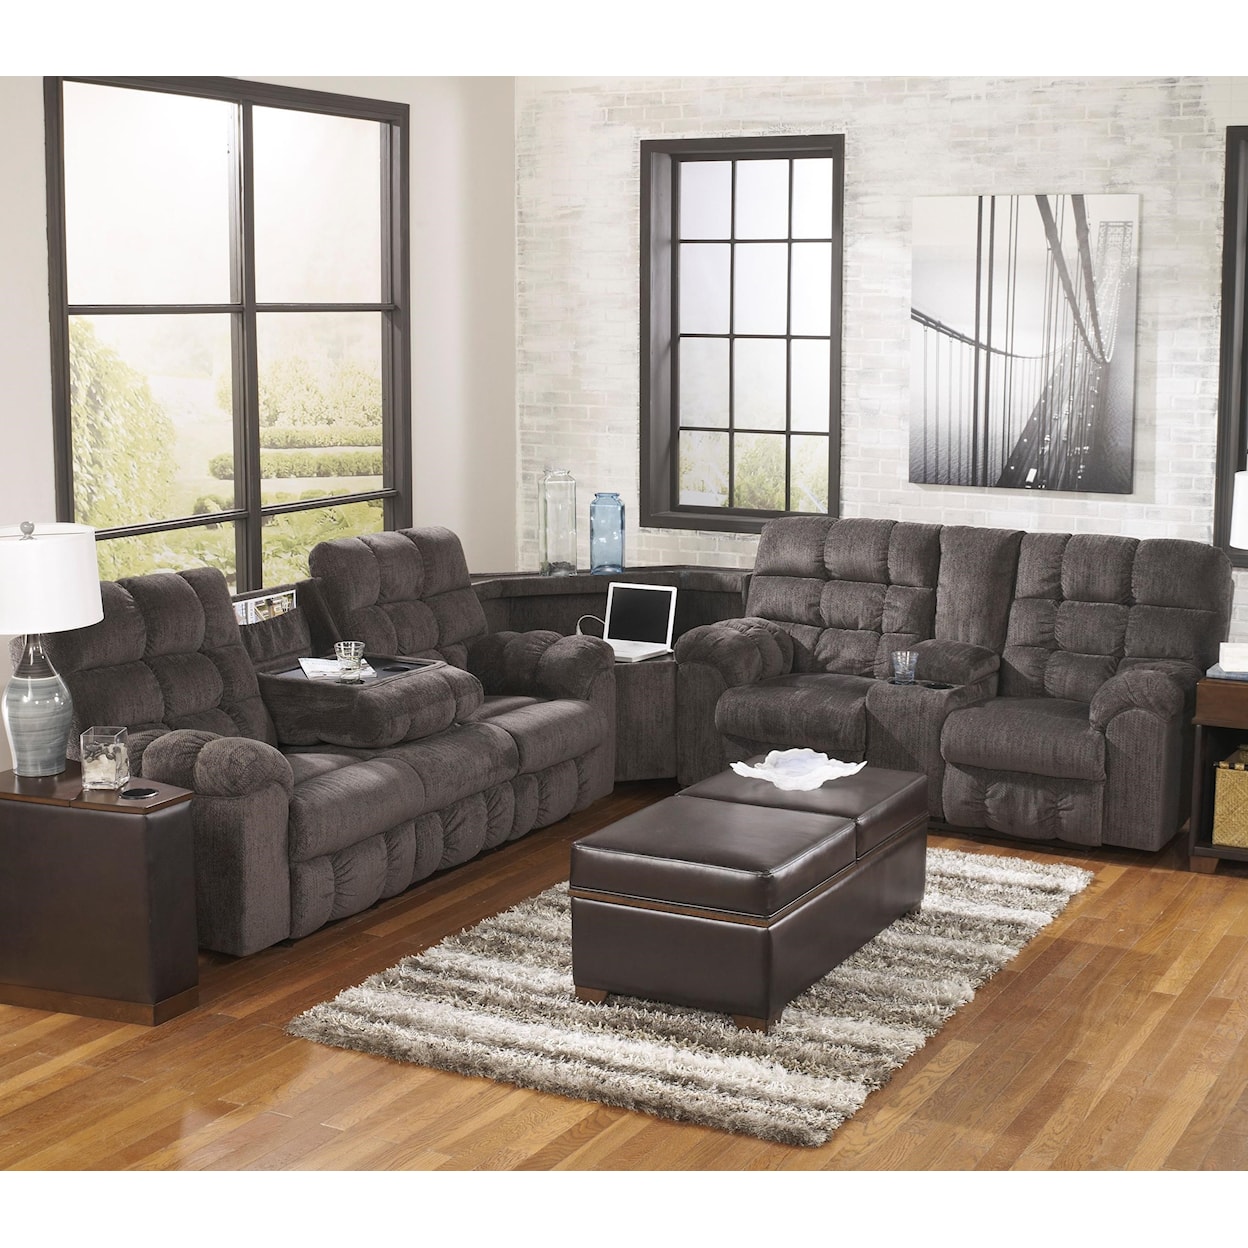 Ashley Signature Design Acieona Reclining Sectional with Right Side Loveseat